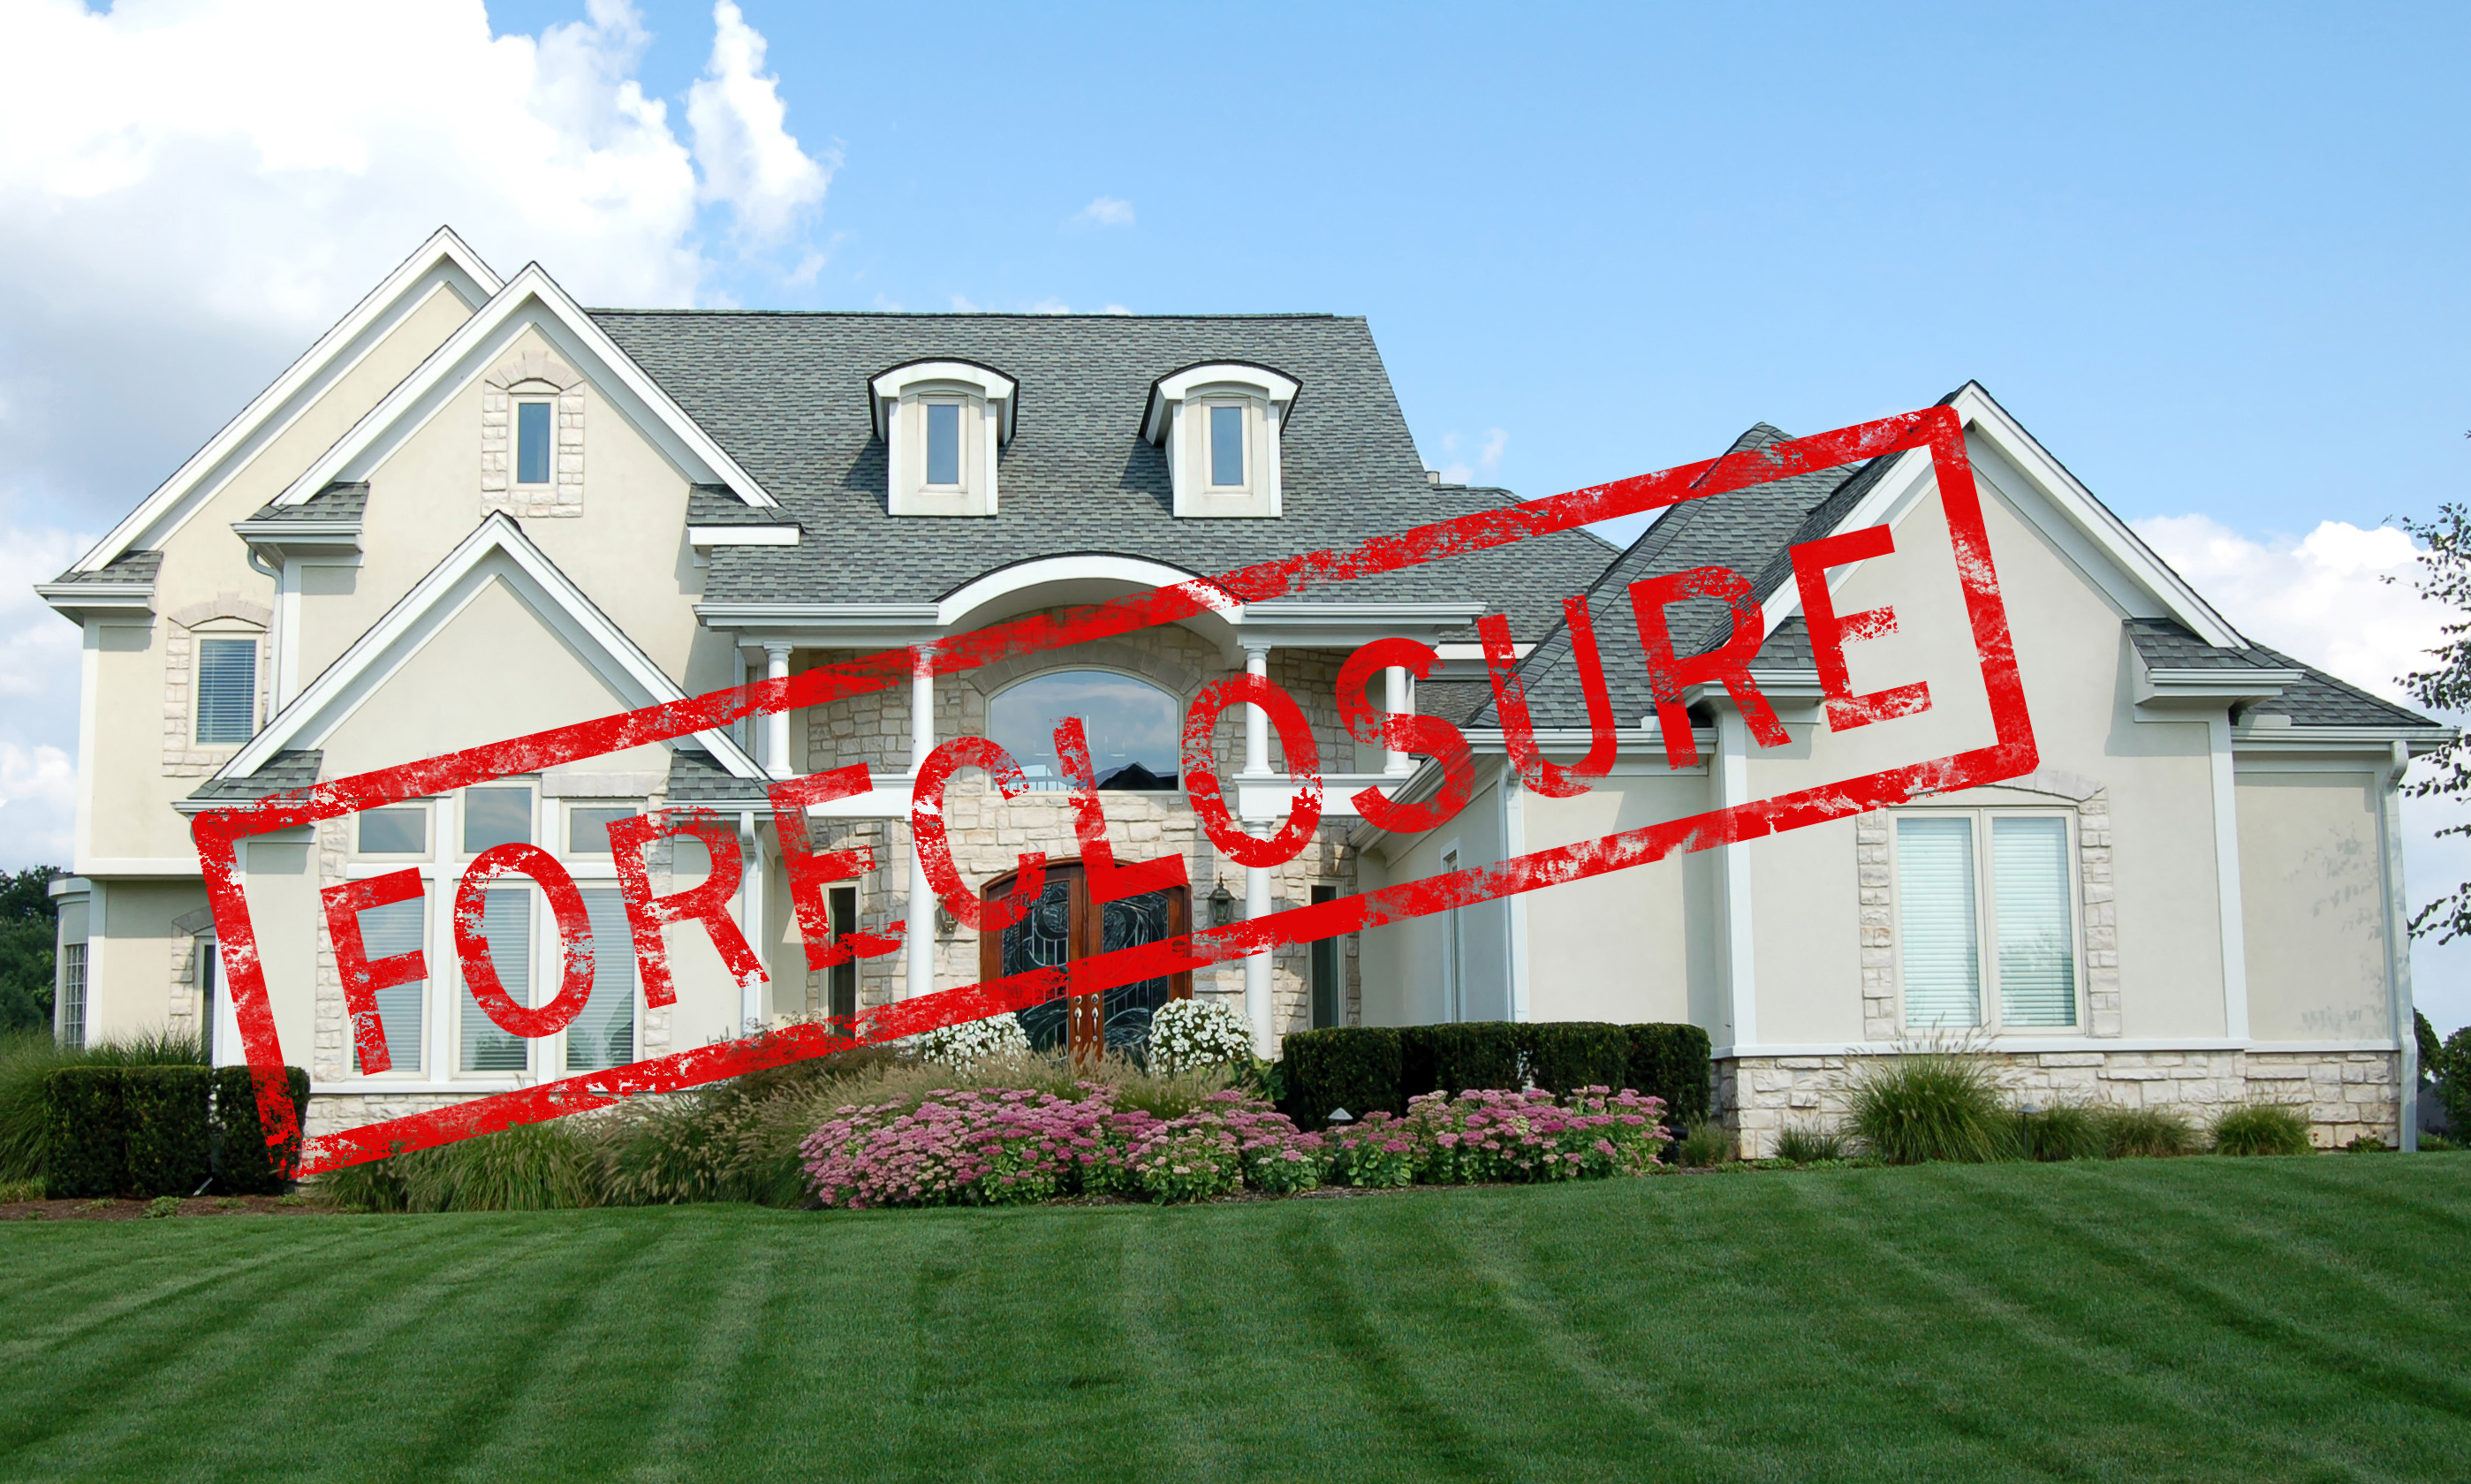 Call Academy Appraisal, Inc. when you need valuations for foreclosures